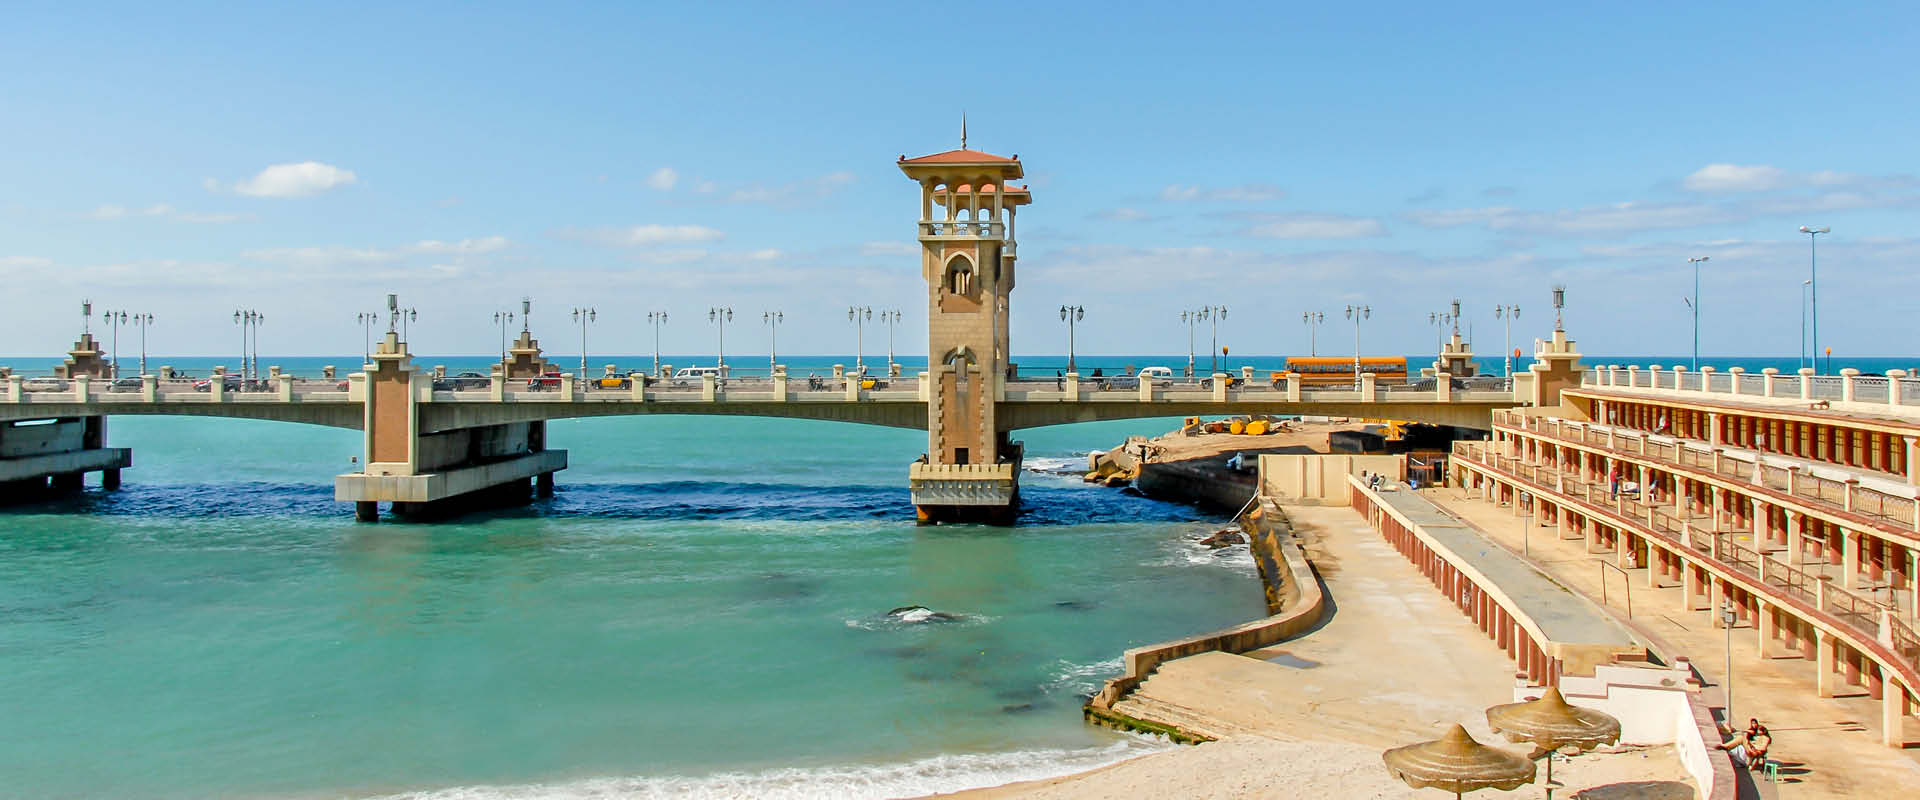 Beach area and bathing box grandstand and iconic Stanley bridge, Alexandria